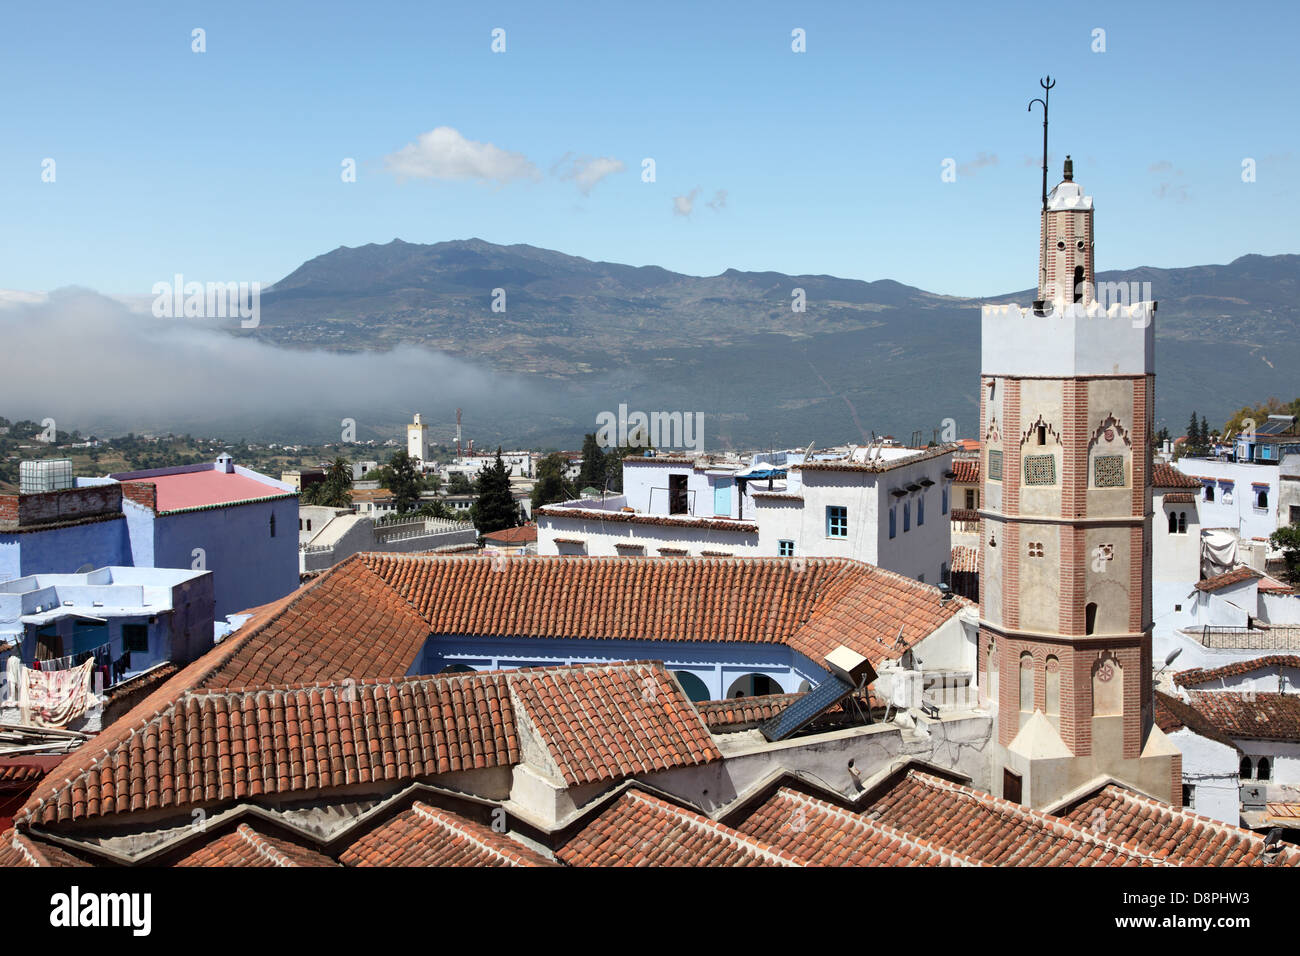 Over the roofs of Chefchaouen, Morocco Stock Photo